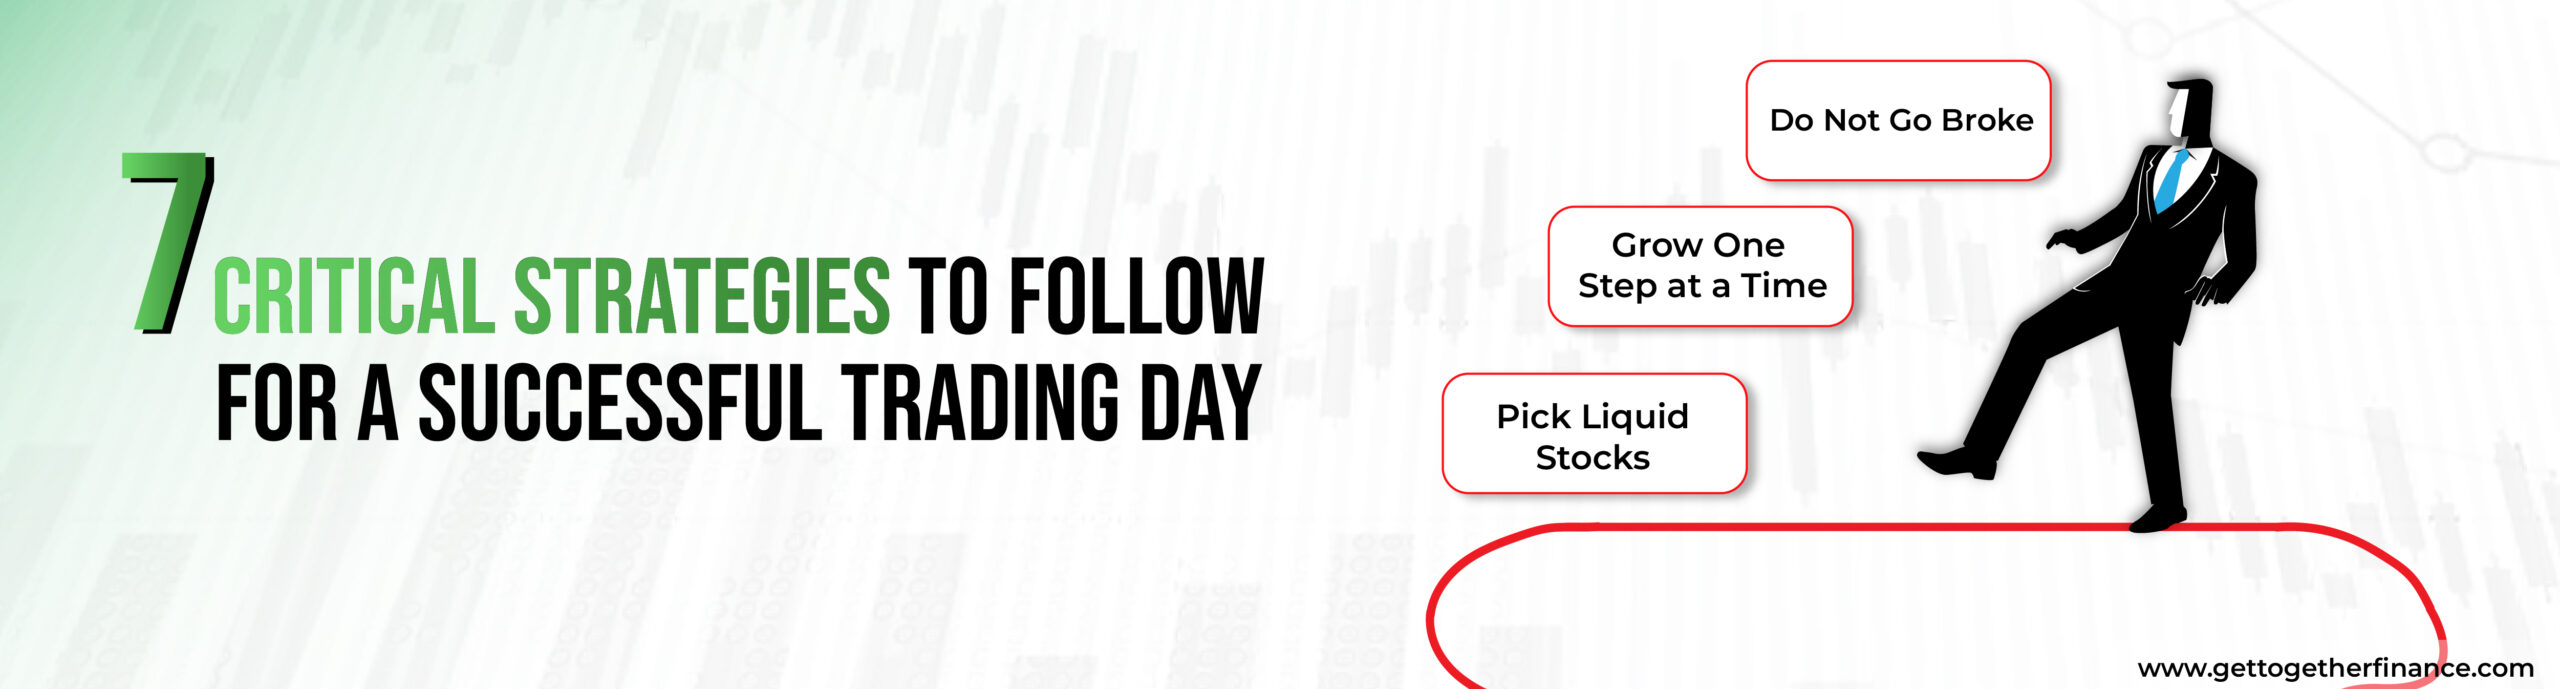 strategies to follow for intraday trading